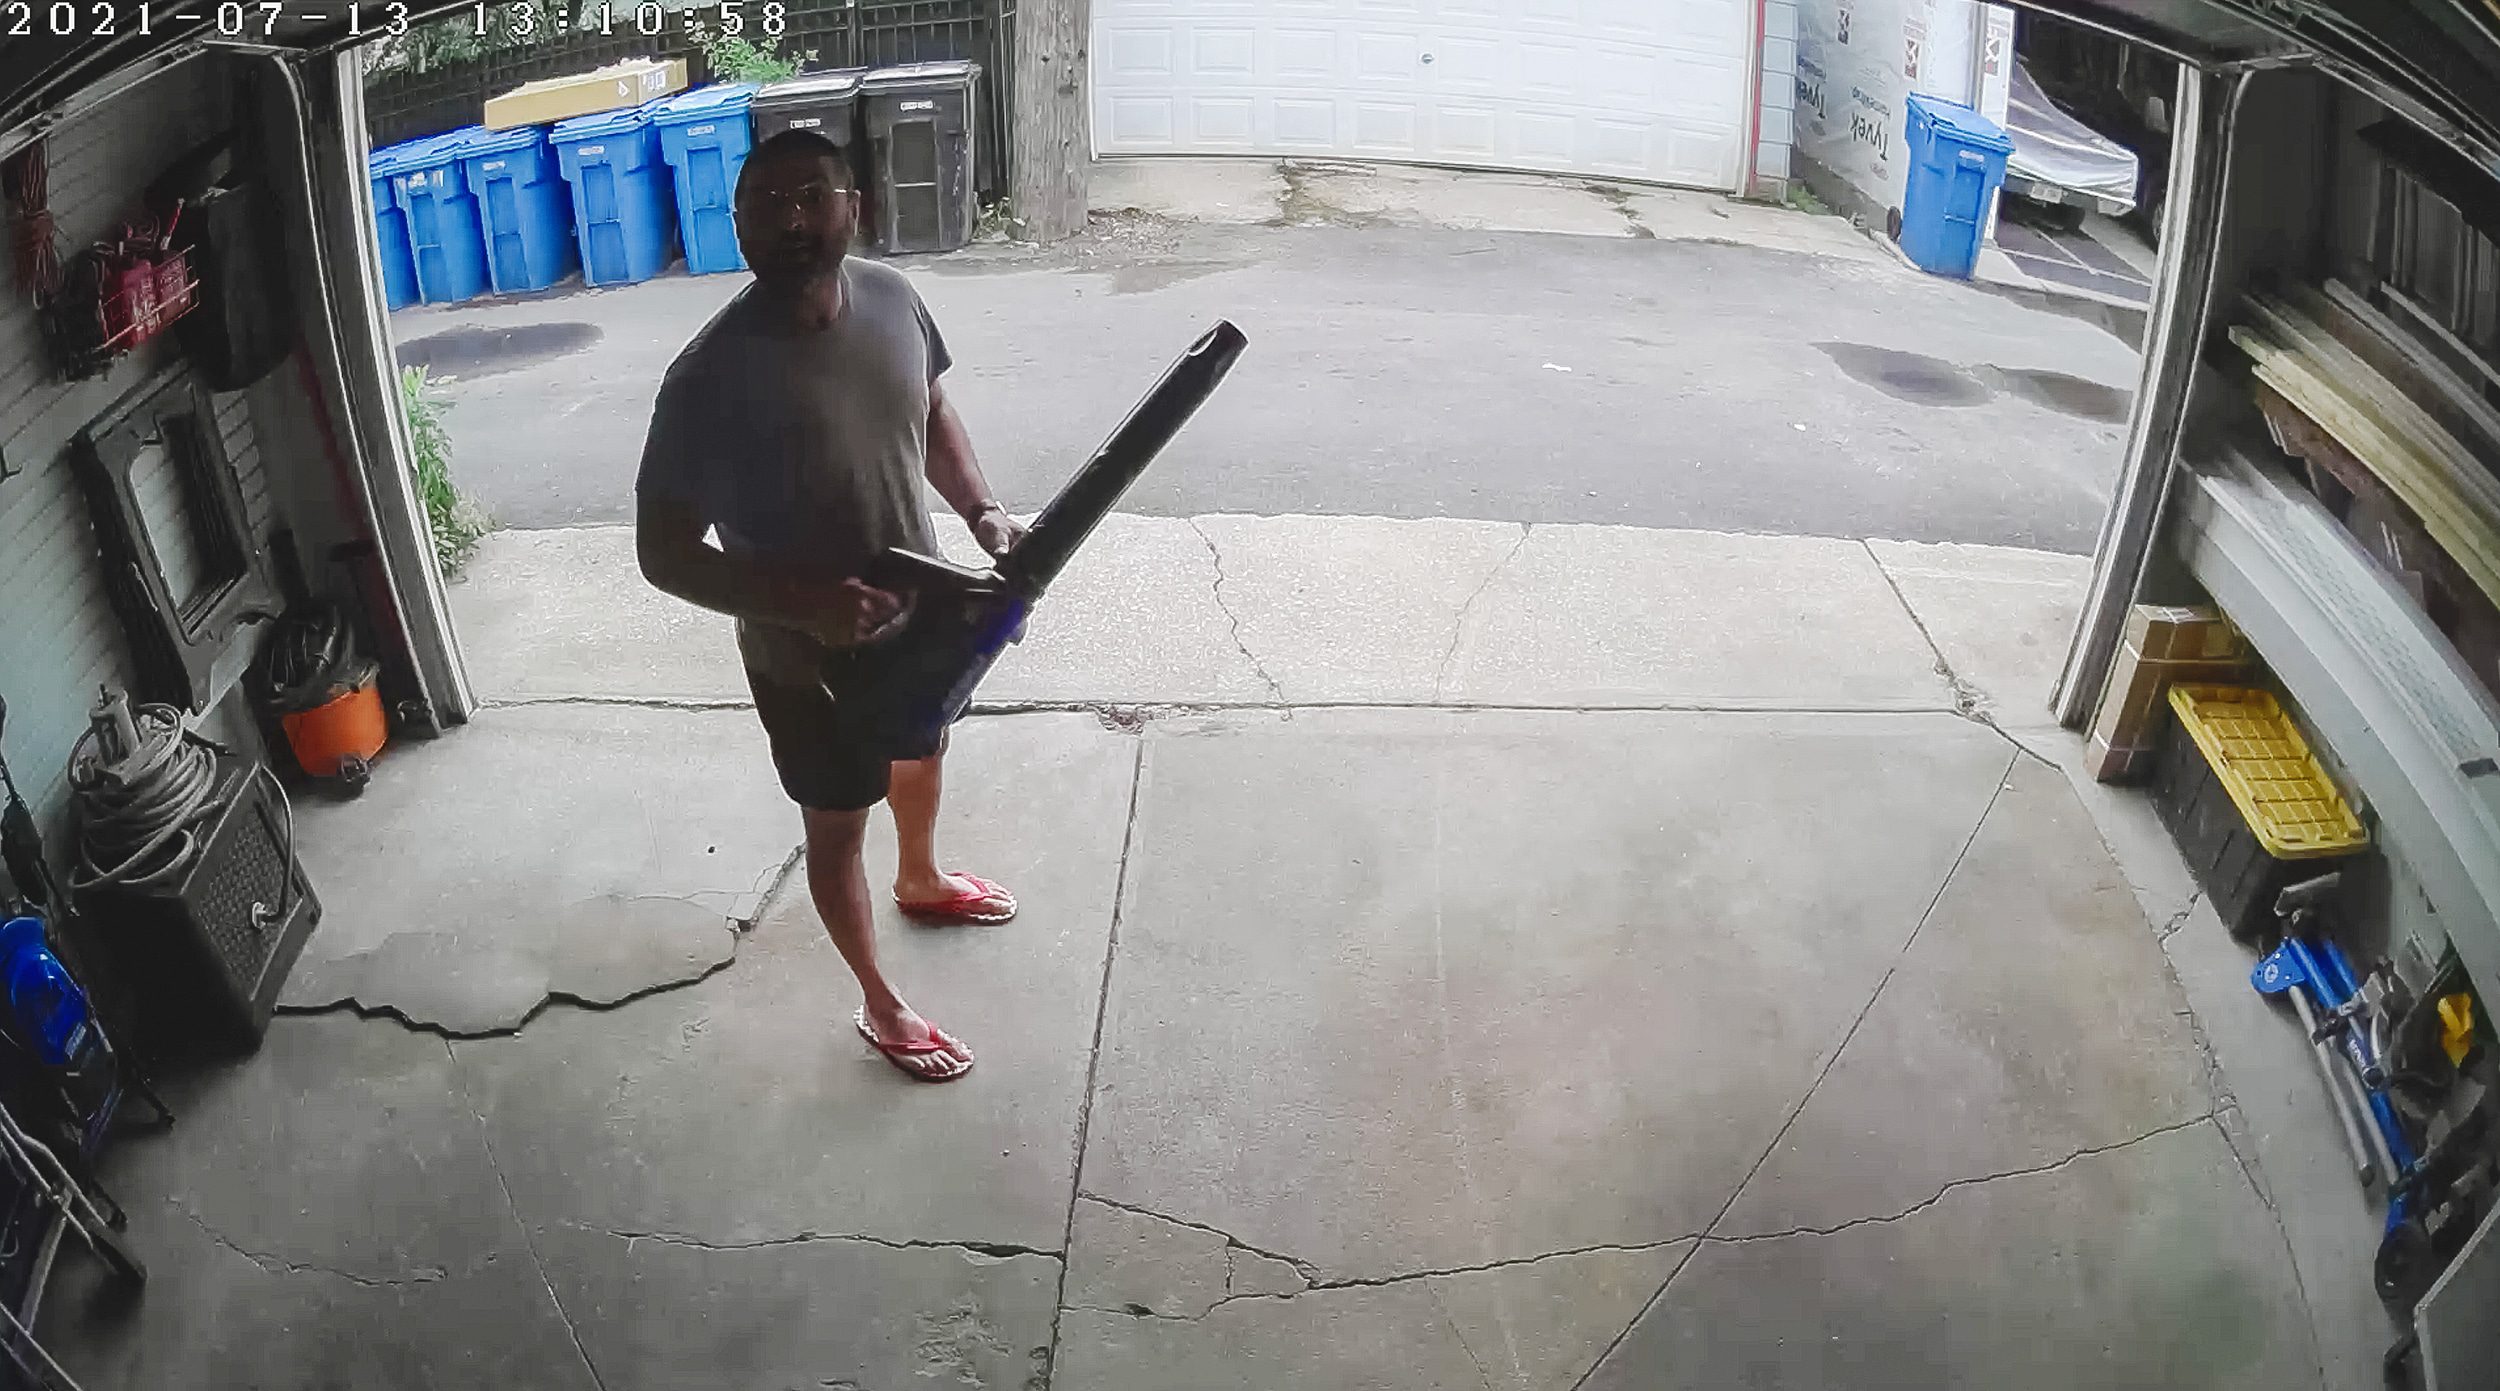 A screengrab of our friend Nithin stopping by to borrow our leaf blower when we weren't around to let him into the garage. 